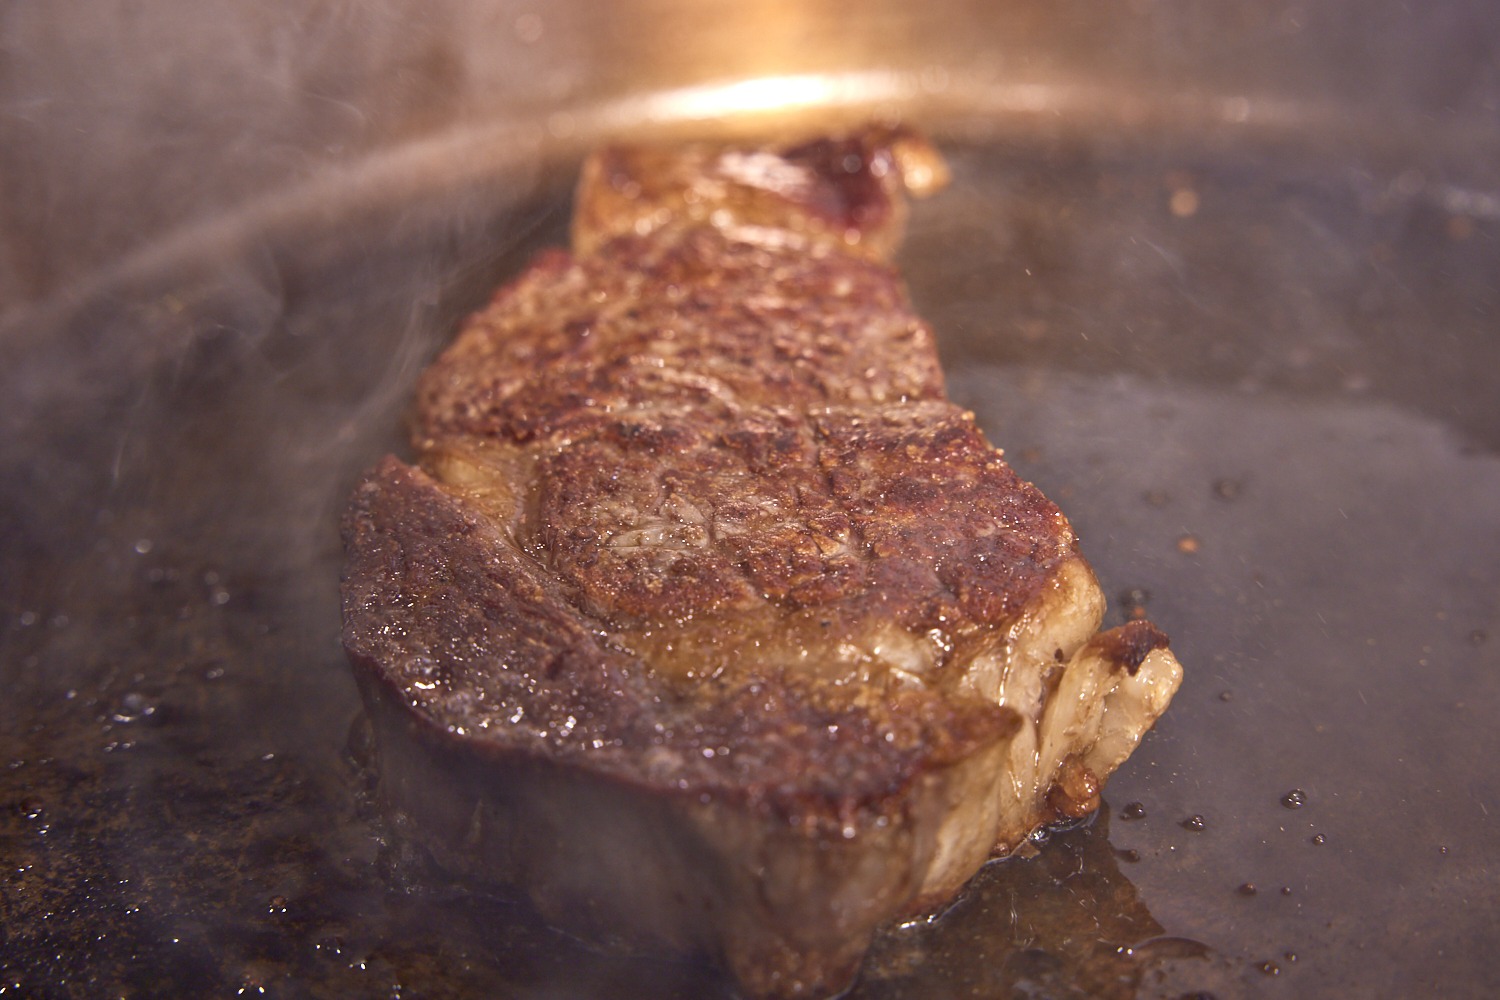 The steak with a well established crust